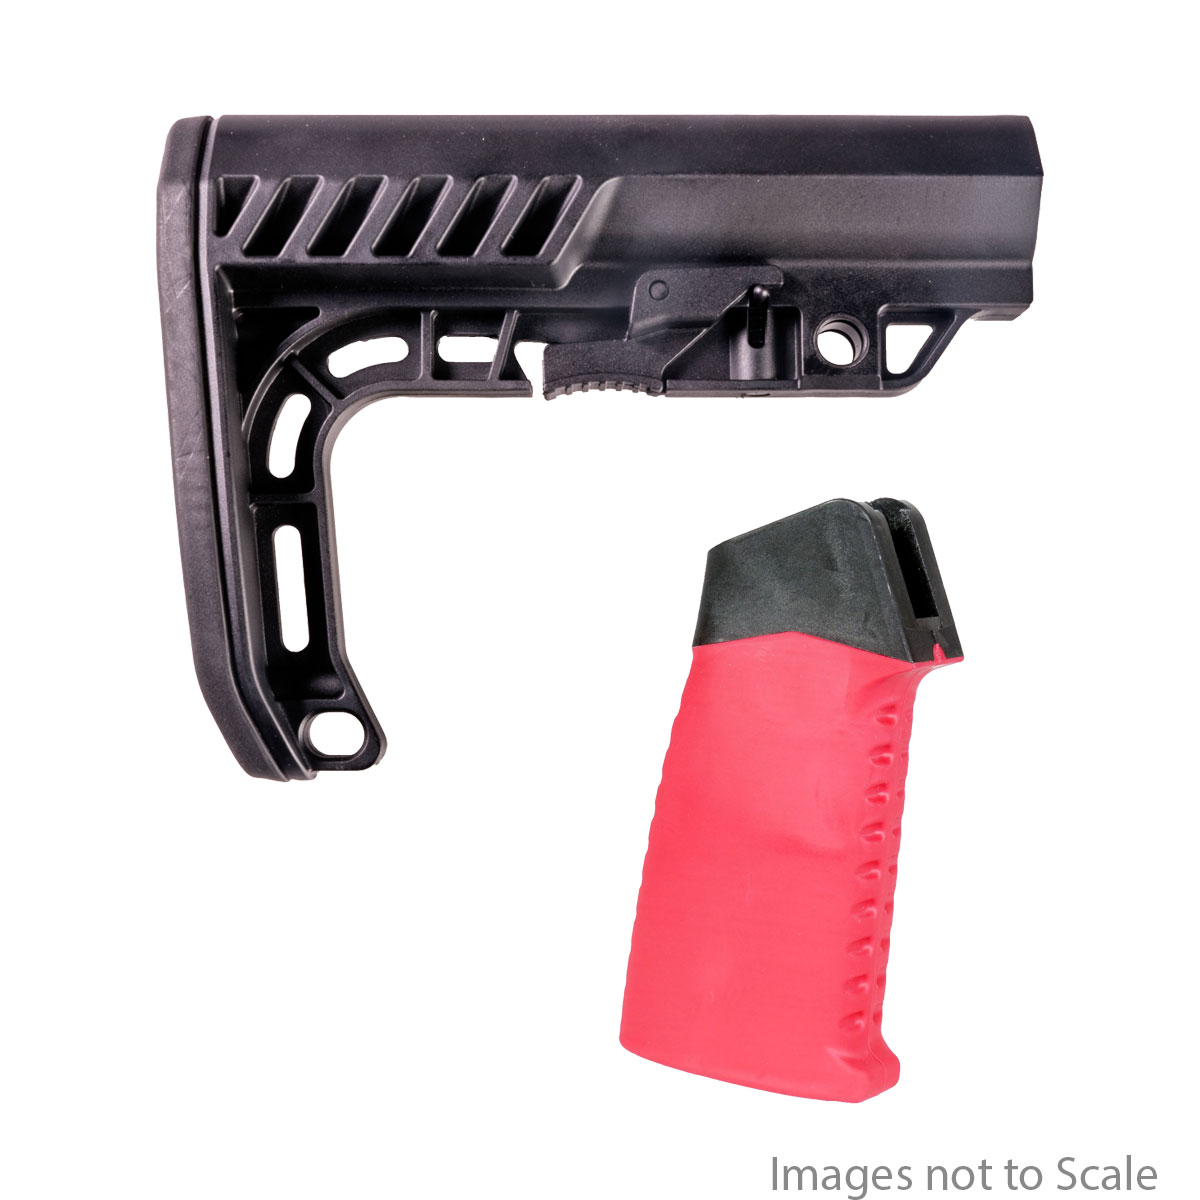 Furniture Upgrade Kit: Team Accessories Corp AR15 Grip Window Grip Straight Top Smooth/Ribbed Red  + Gauntlet Arms Minimalist AR-15 Stock 